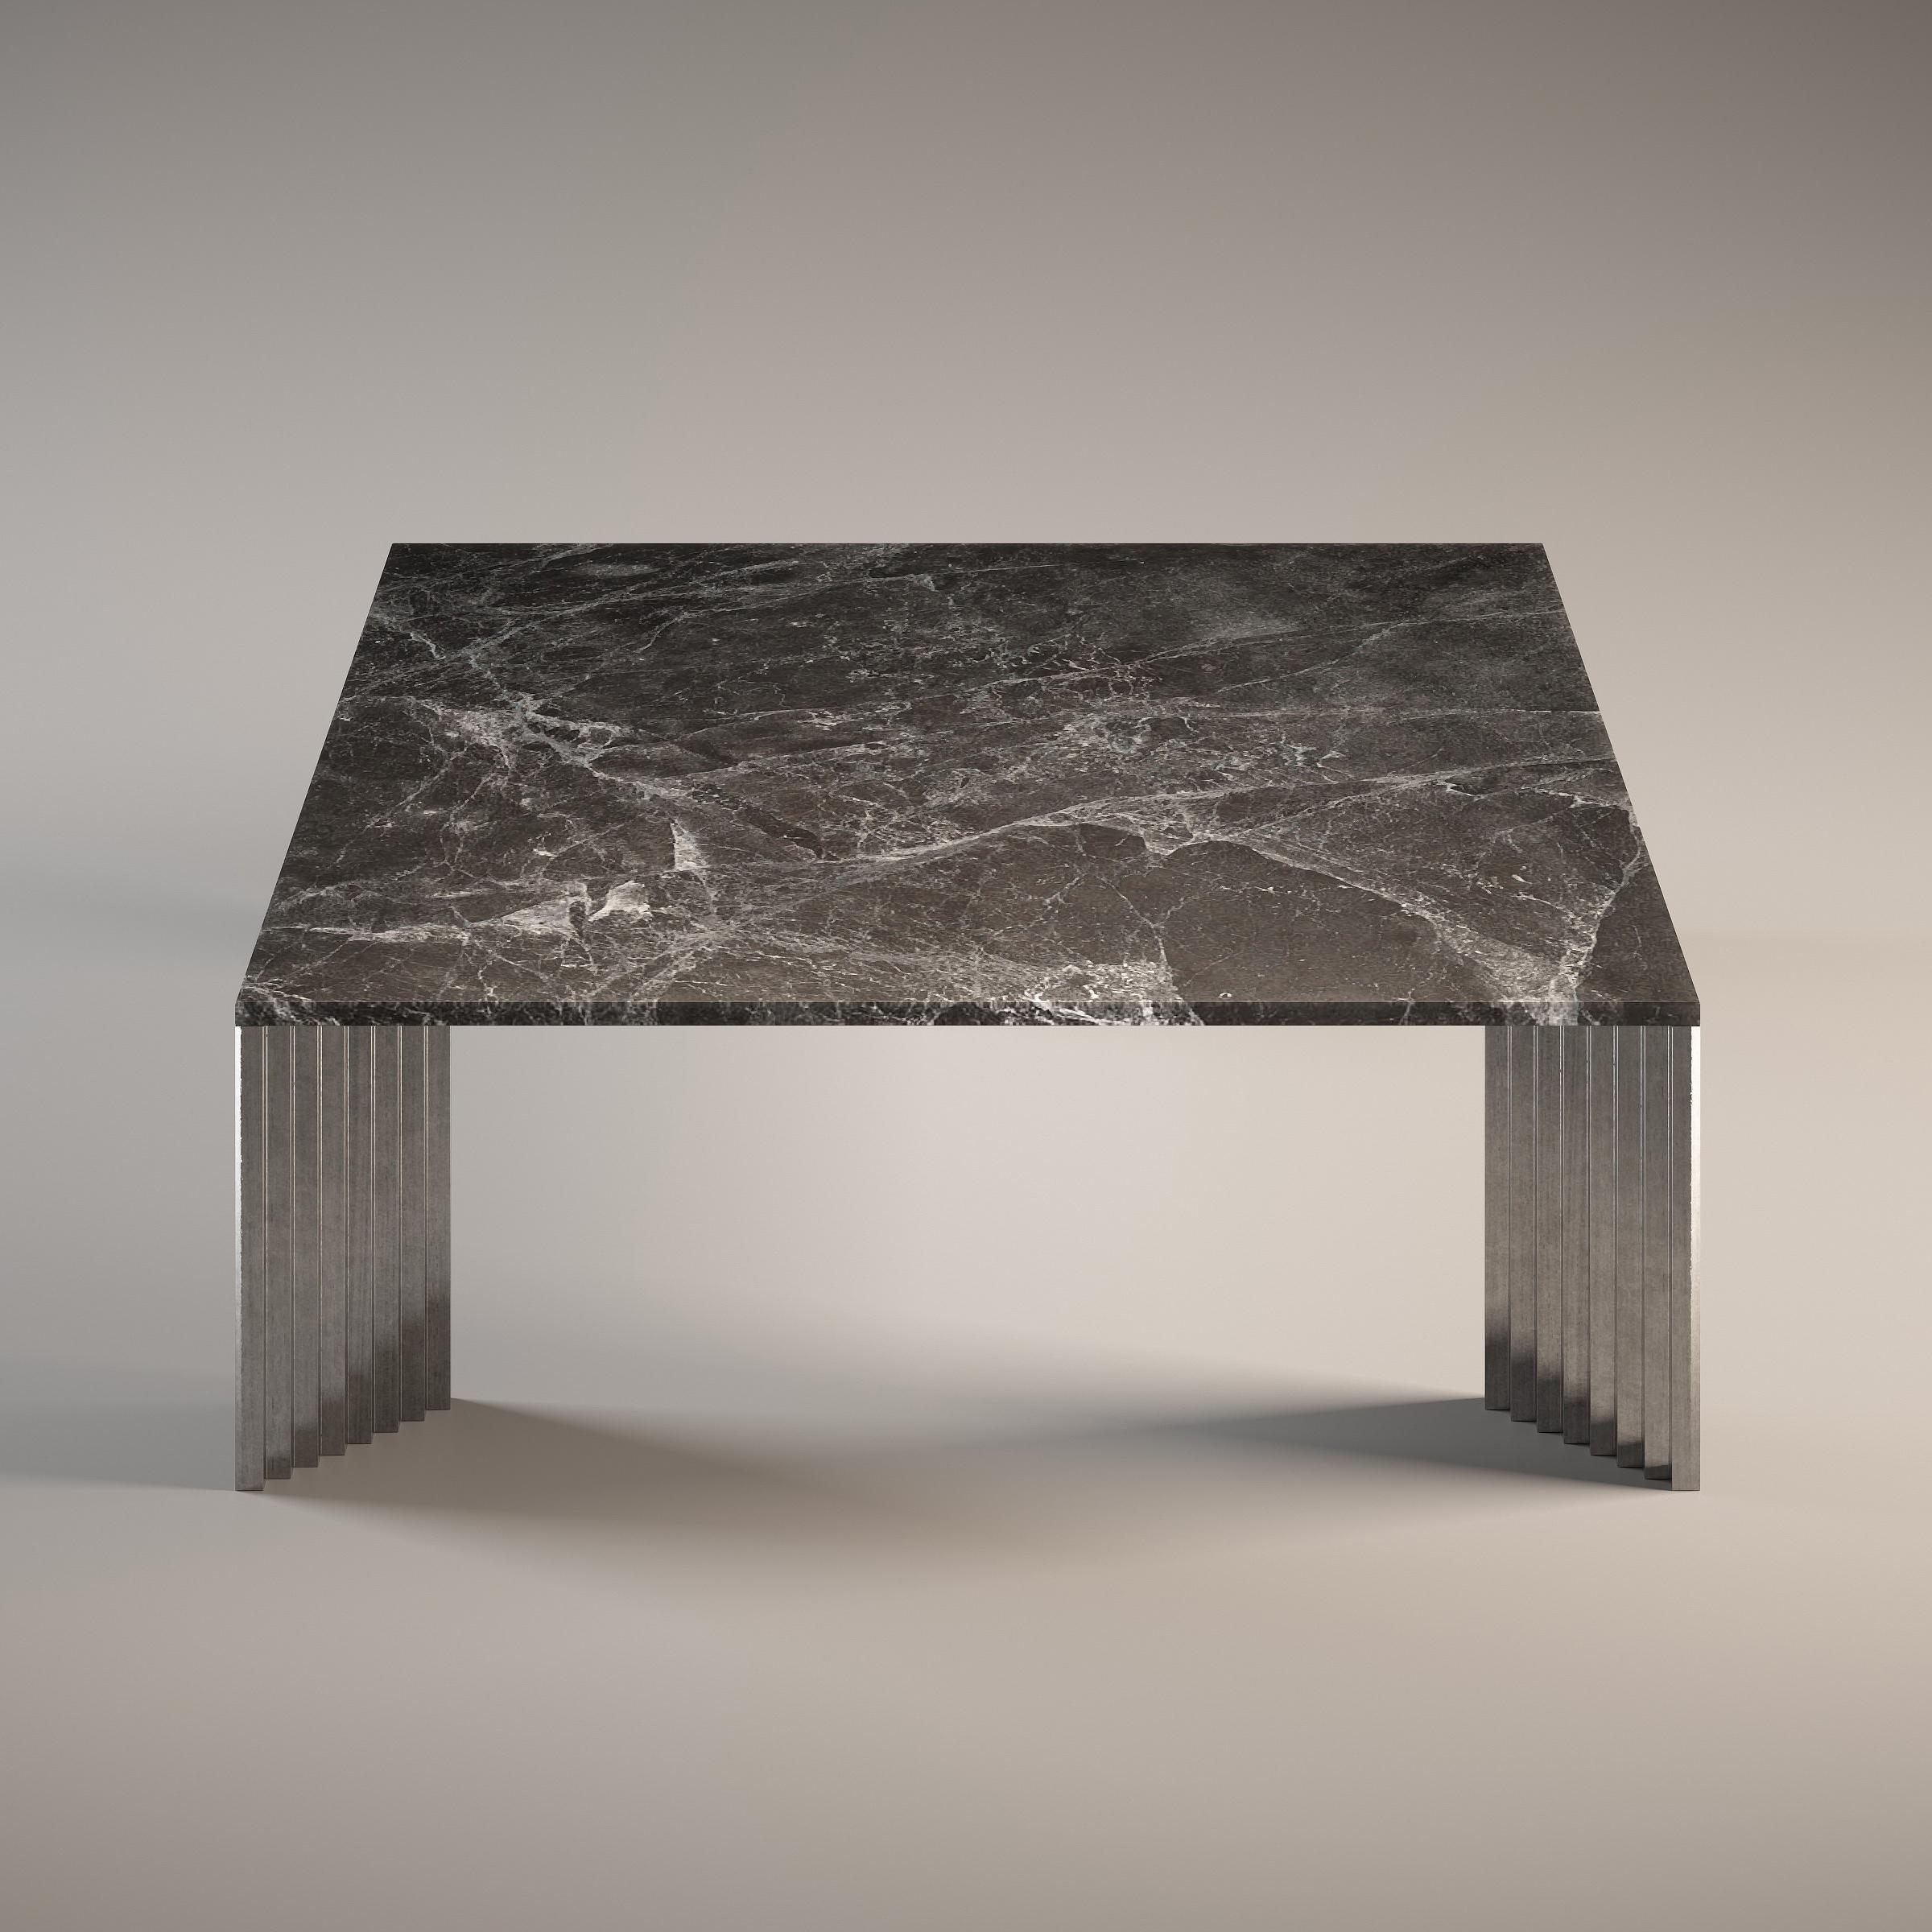 Piero Emperador Grey Coffee Table by Fred and Juul
Dimensions: D 120 x W 120 x H 40 cm.
Materials: Emperador Grey marble and aluminum.

Available in White Carrara, Rosa Tea or Emperador Grey marble tops. 
Available in bronze or aluminum legs. Custom